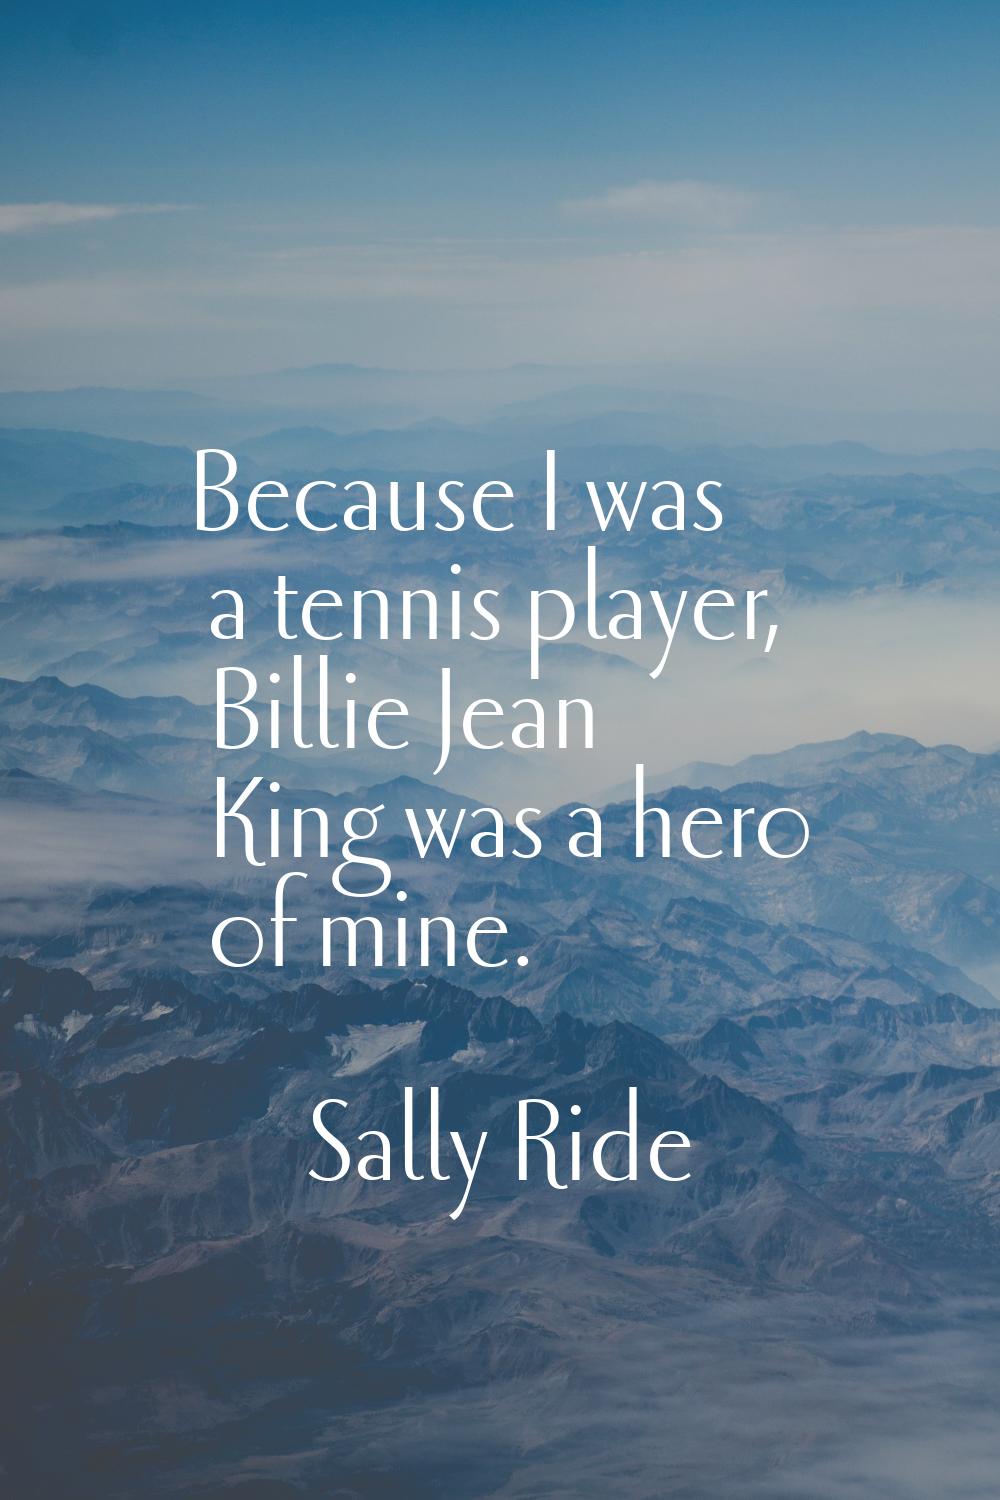 Because I was a tennis player, Billie Jean King was a hero of mine.